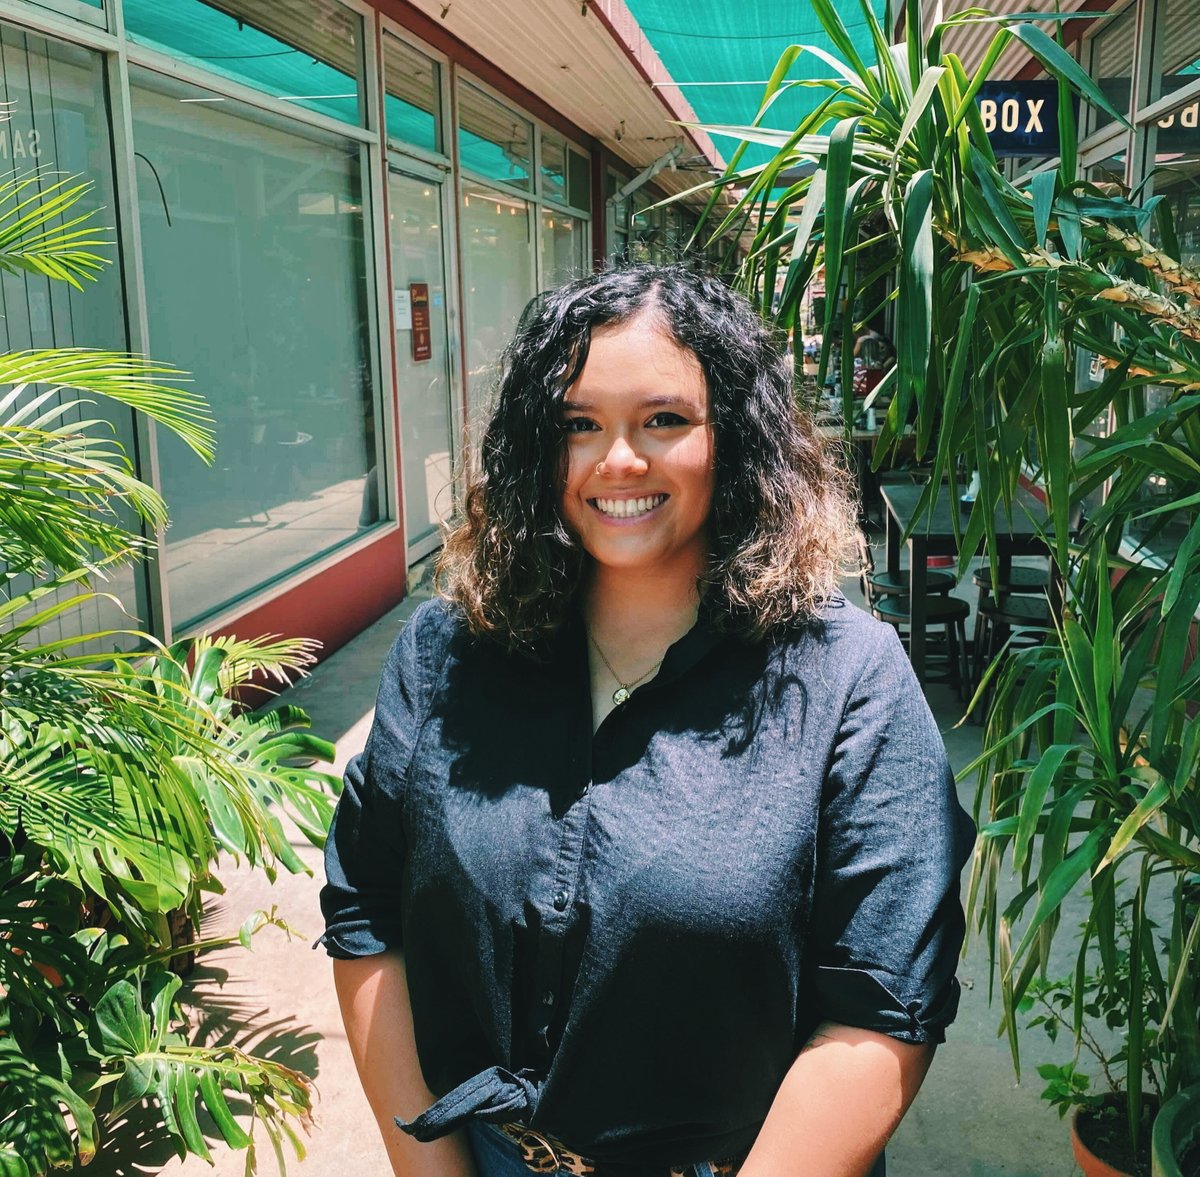 Melanie, 22, is Chair of the NT Youth Roundtable 2020. As part of this, she is educating young people on voting and being more politically engaged. “Only 66.4% of people between 18 and 24 are enrolled to vote. This is well below the national average of 88.9%.